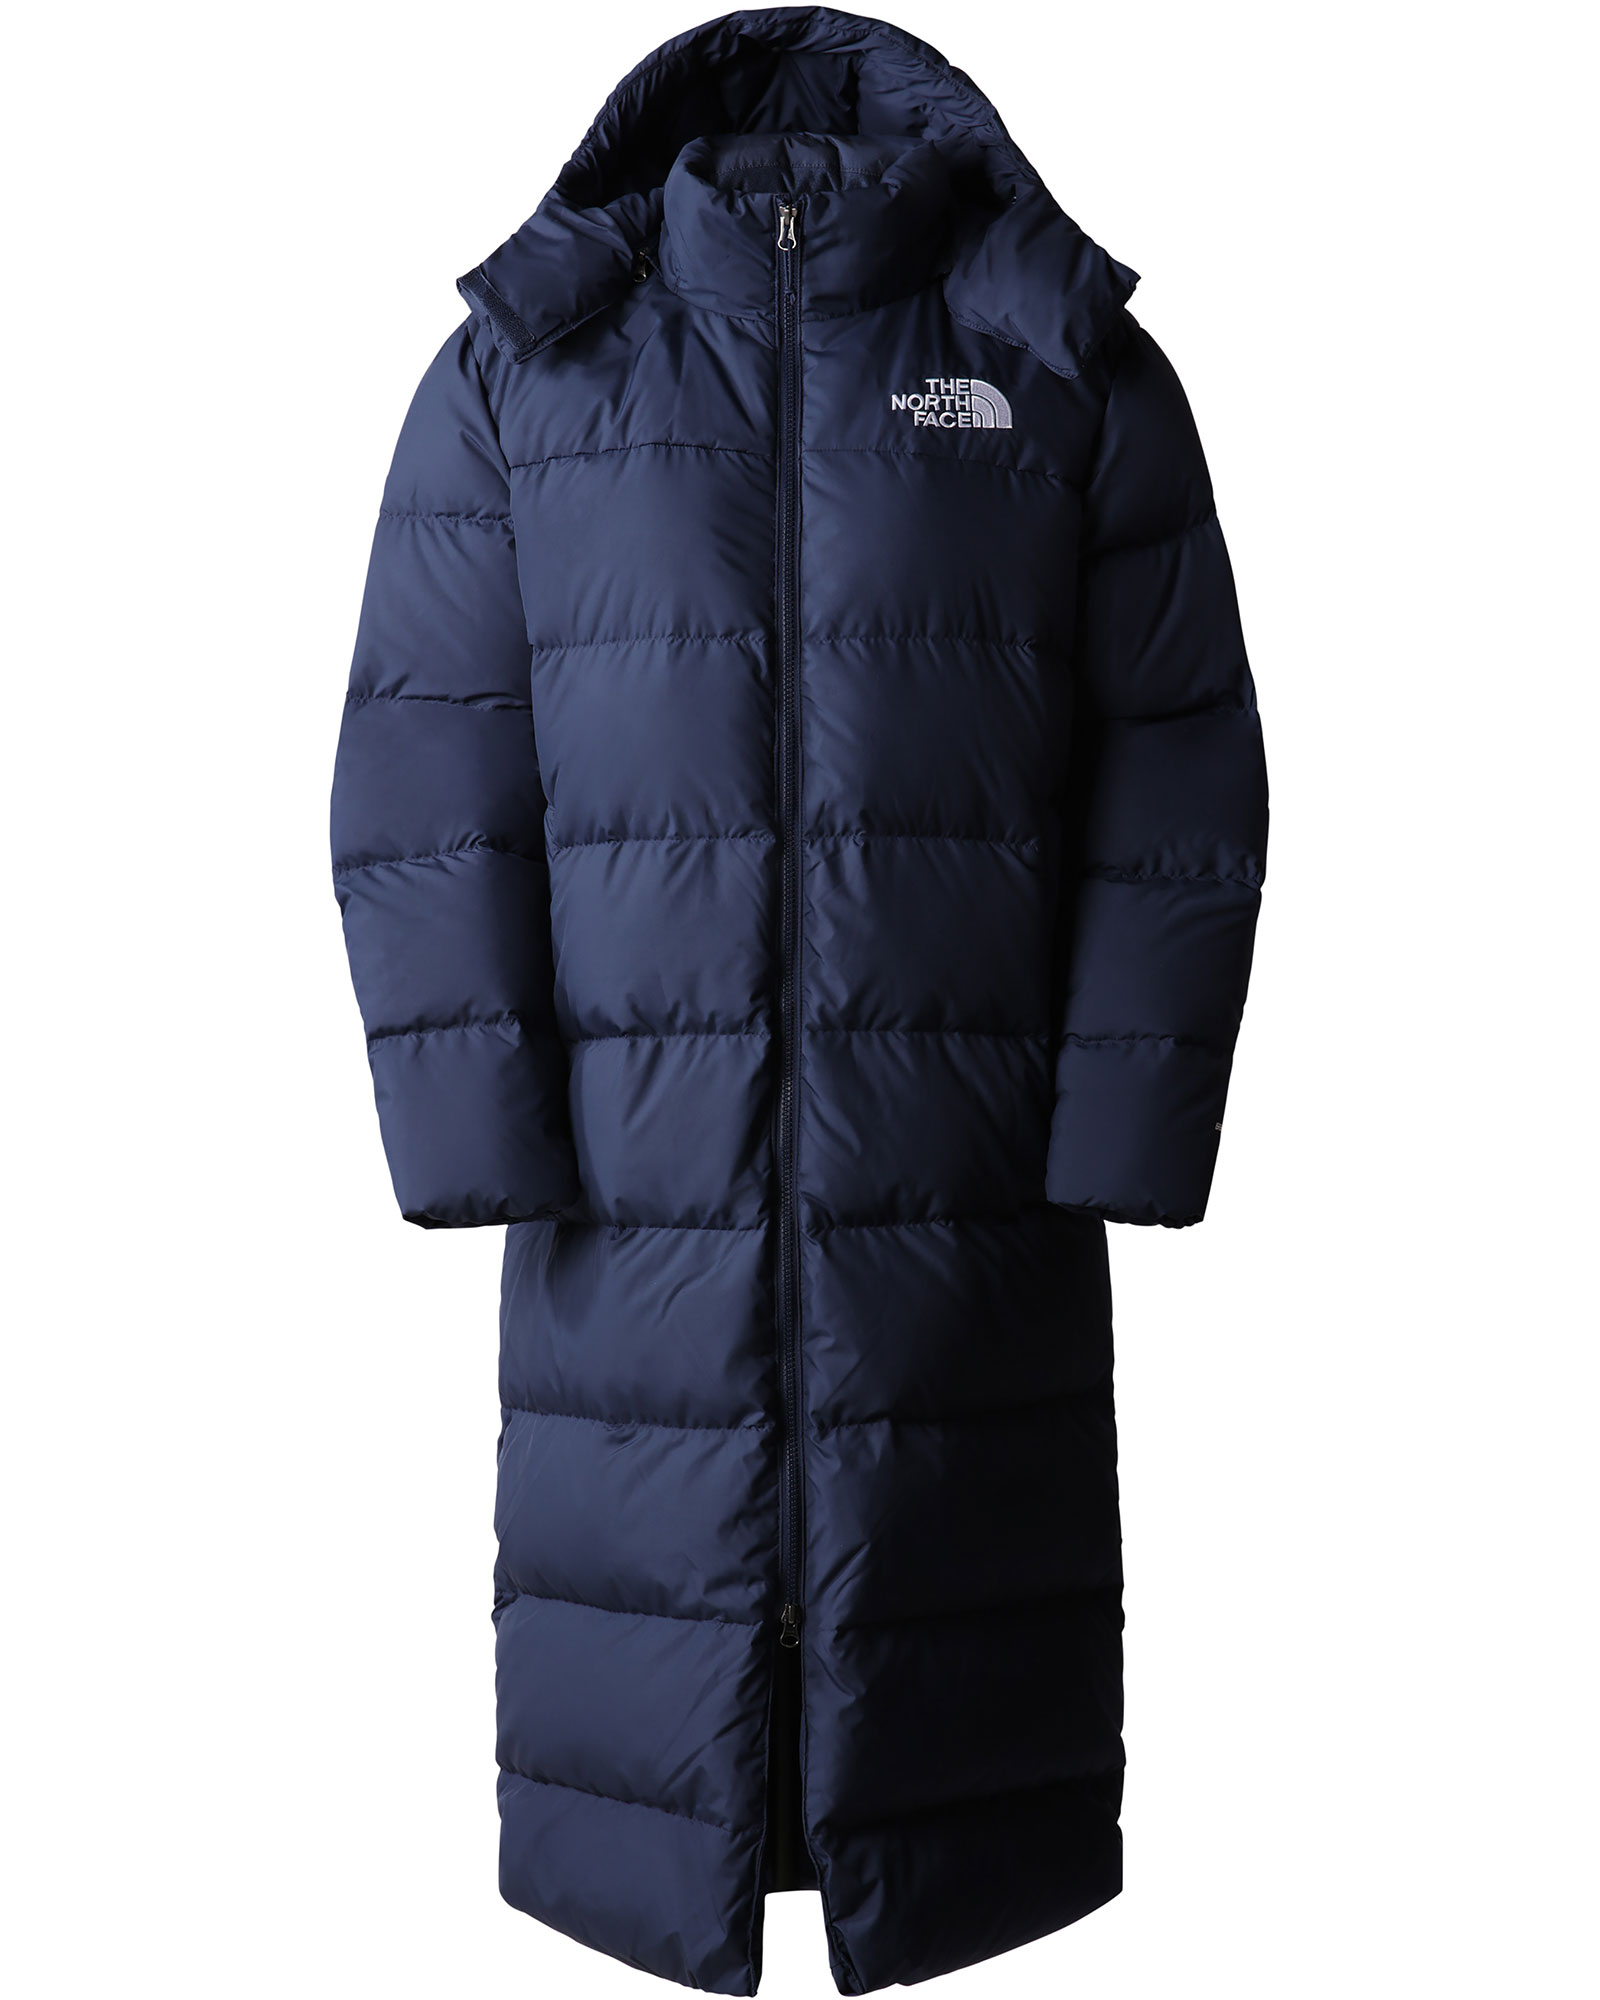 The North Face Triple C Womens Down Parka Jacket